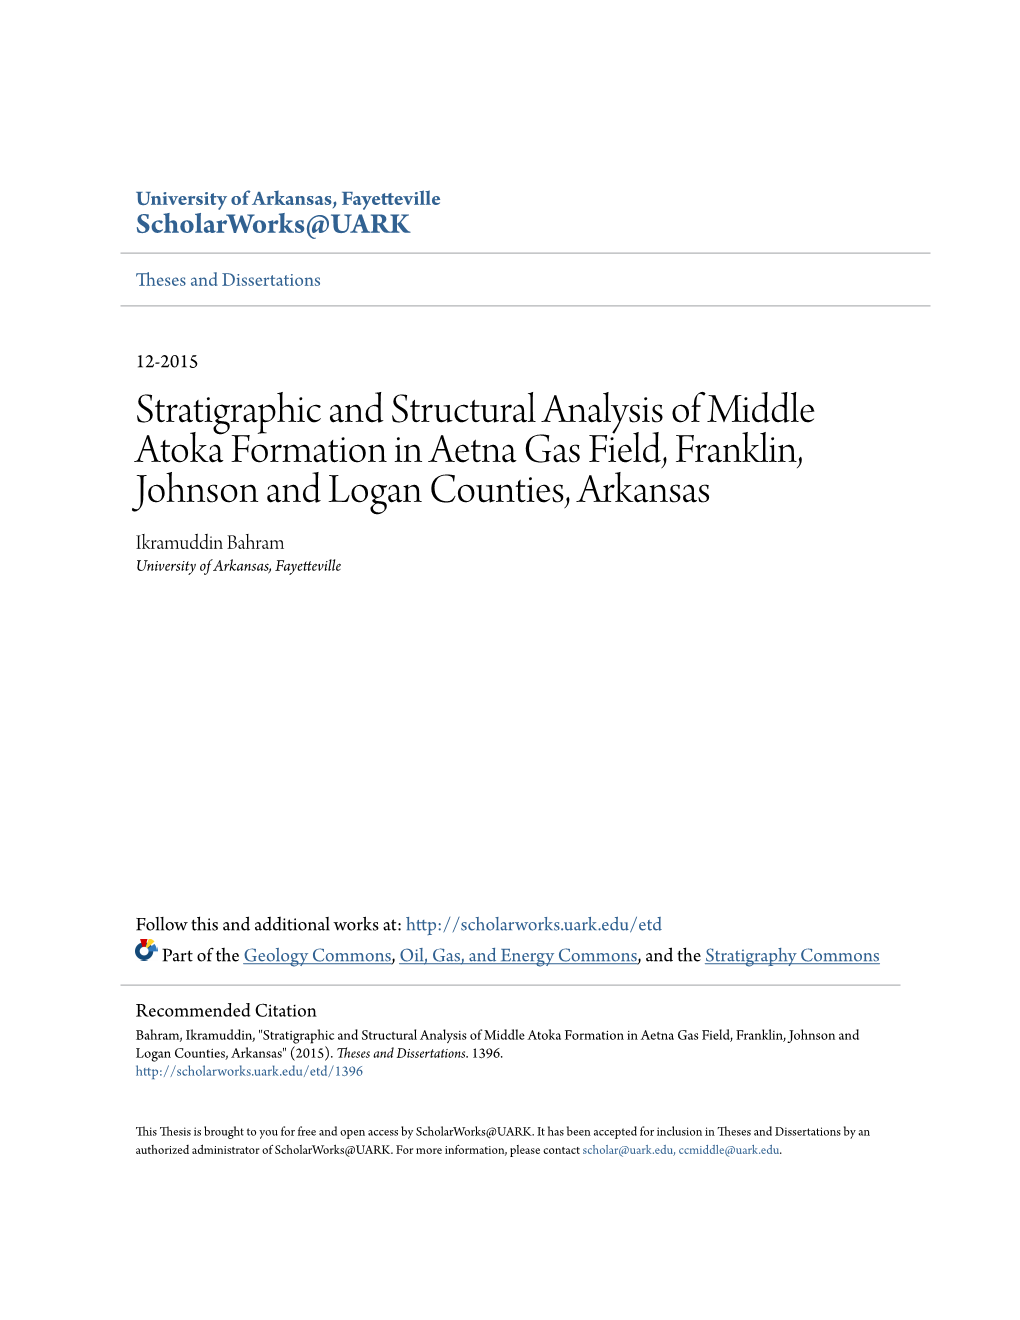 Stratigraphic and Structural Analysis of Middle Atoka Formation in Aetna Gas Field, Franklin, Johnson and Logan Counties, Arkans